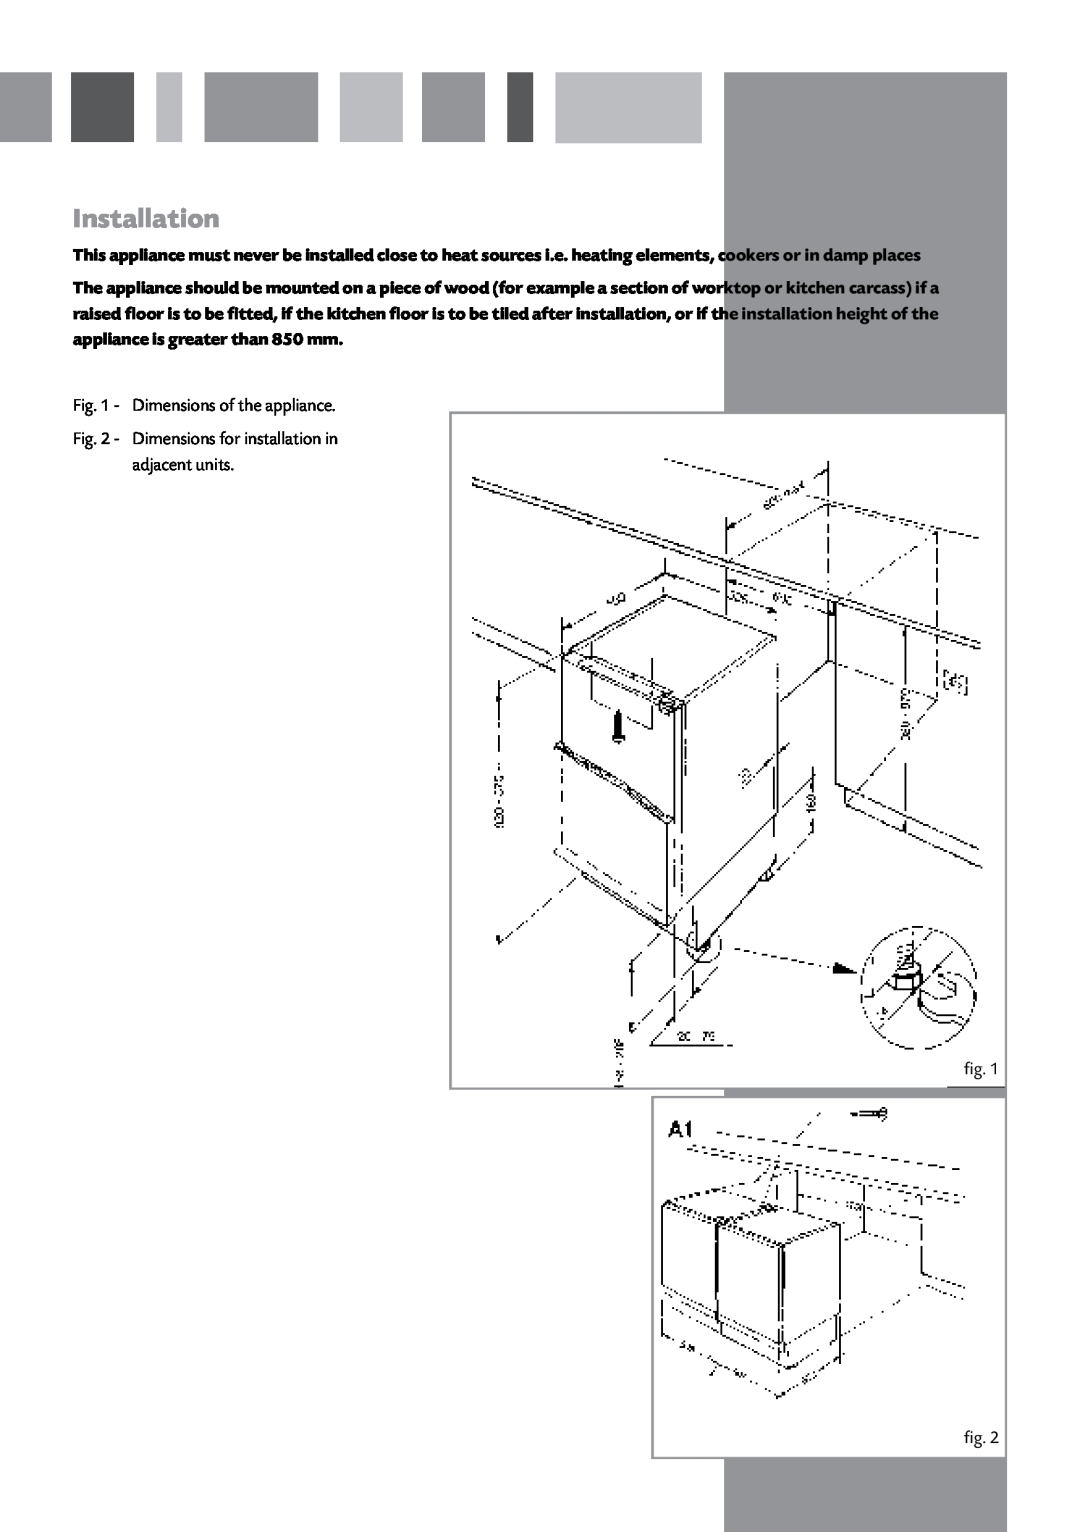 CDA FW221 manual Installation, Dimensions of the appliance 